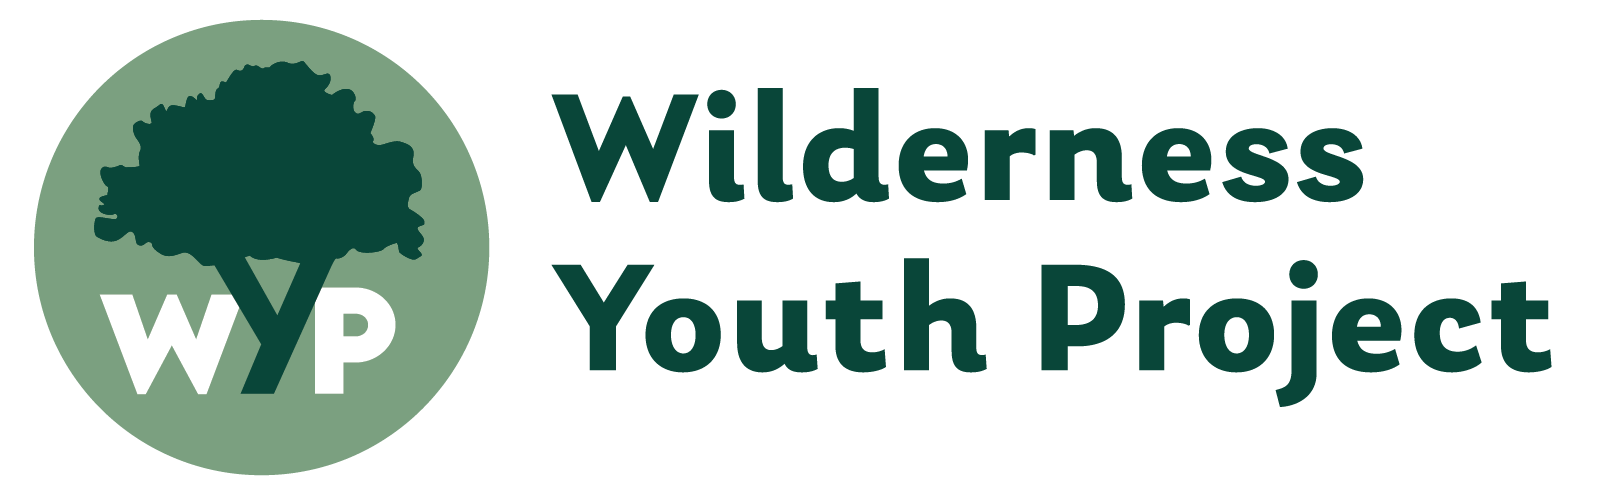 Wilderness Youth Project Logo